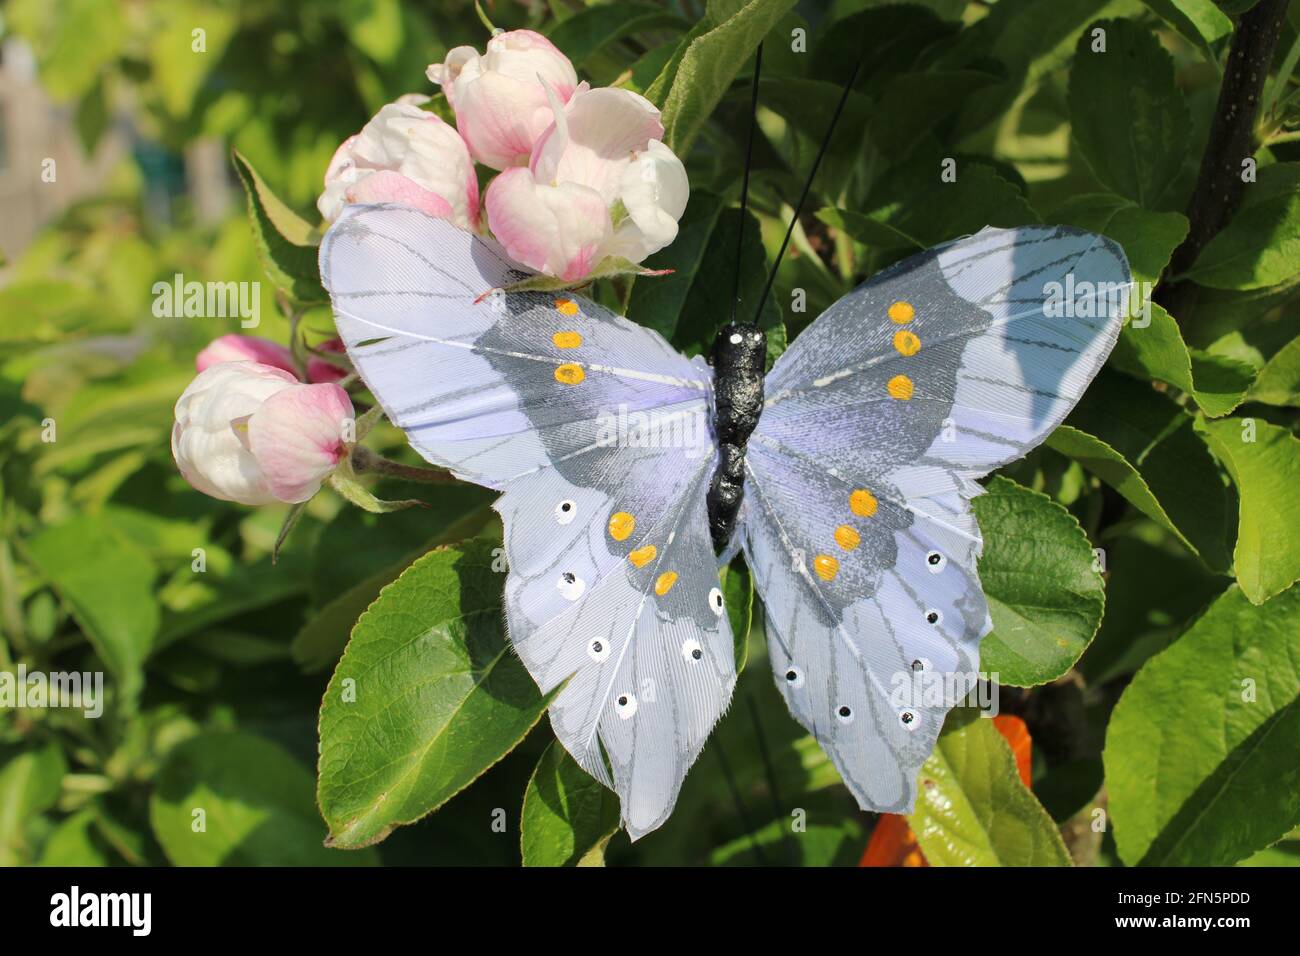 Large blue butterfly on apple blossom Stock Photo